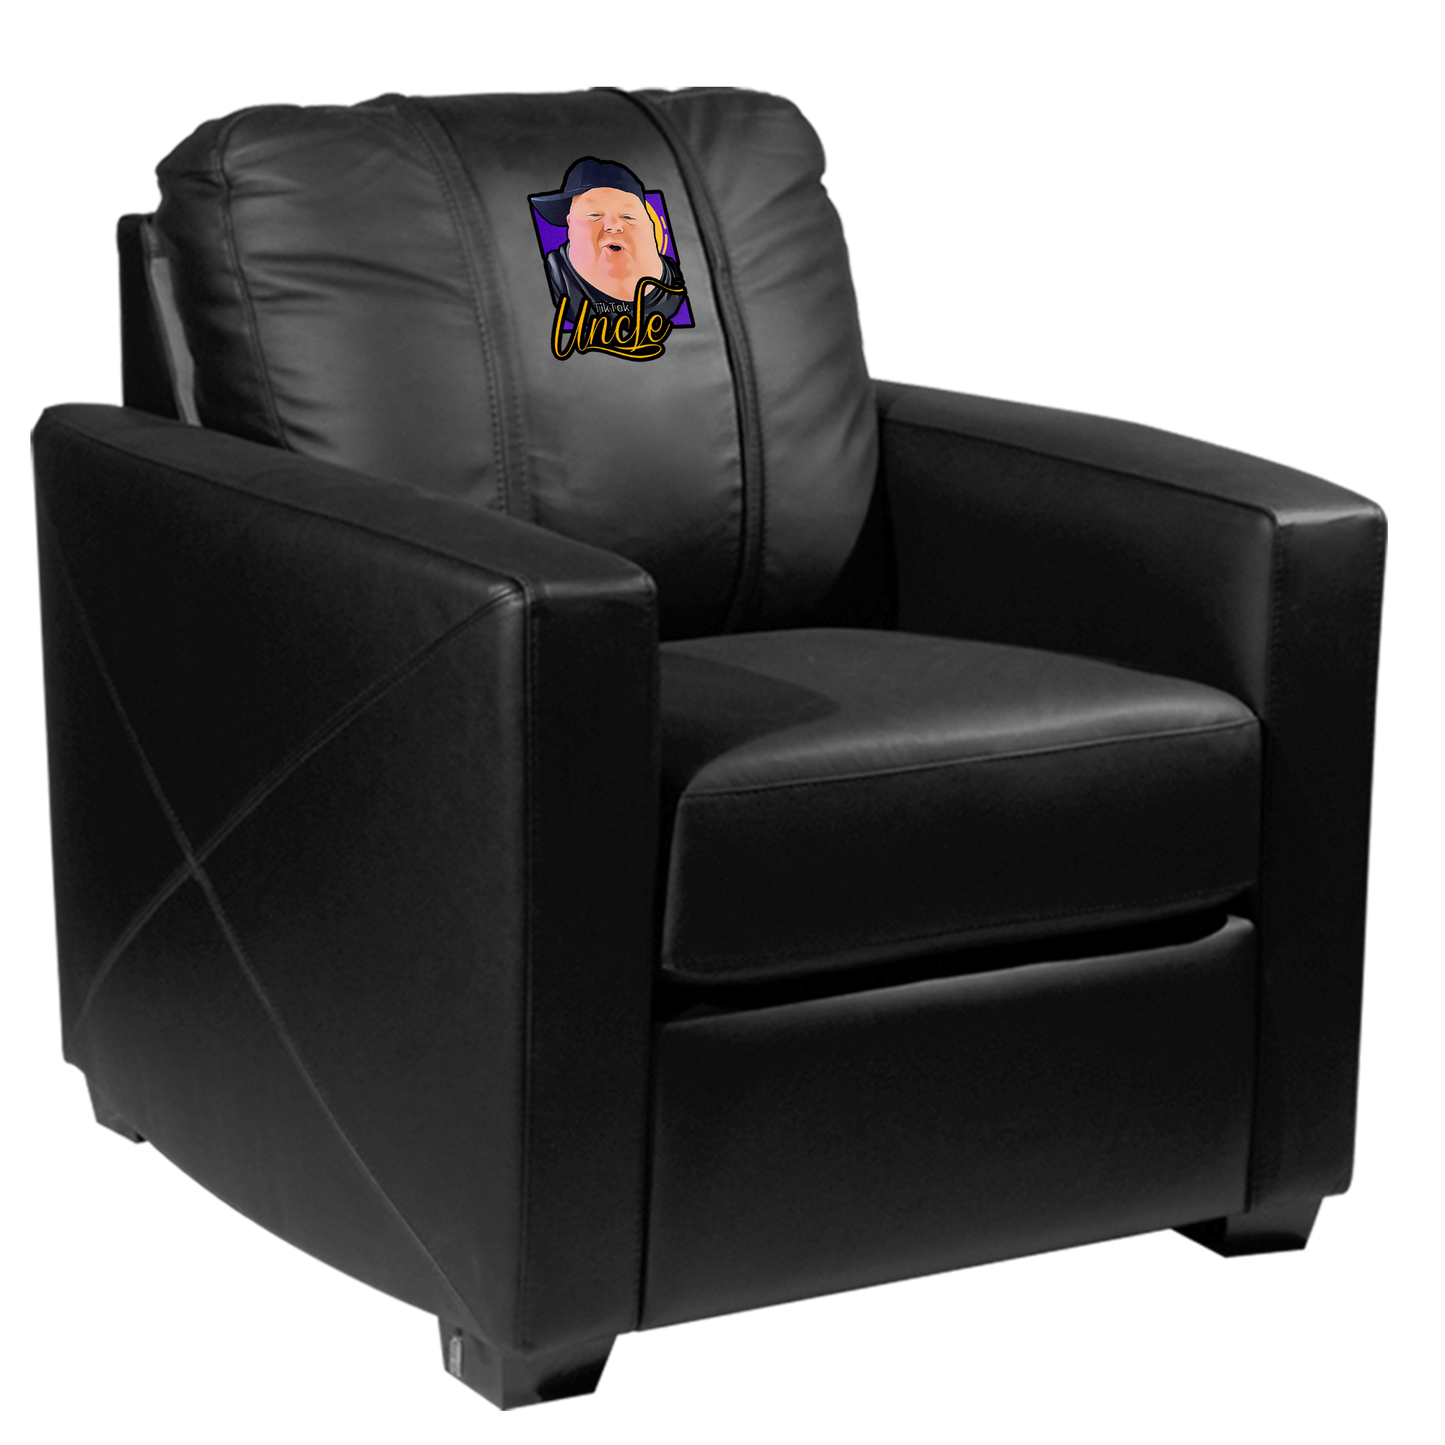 Stationary Club Chair with Tik Tok Uncle  Logo